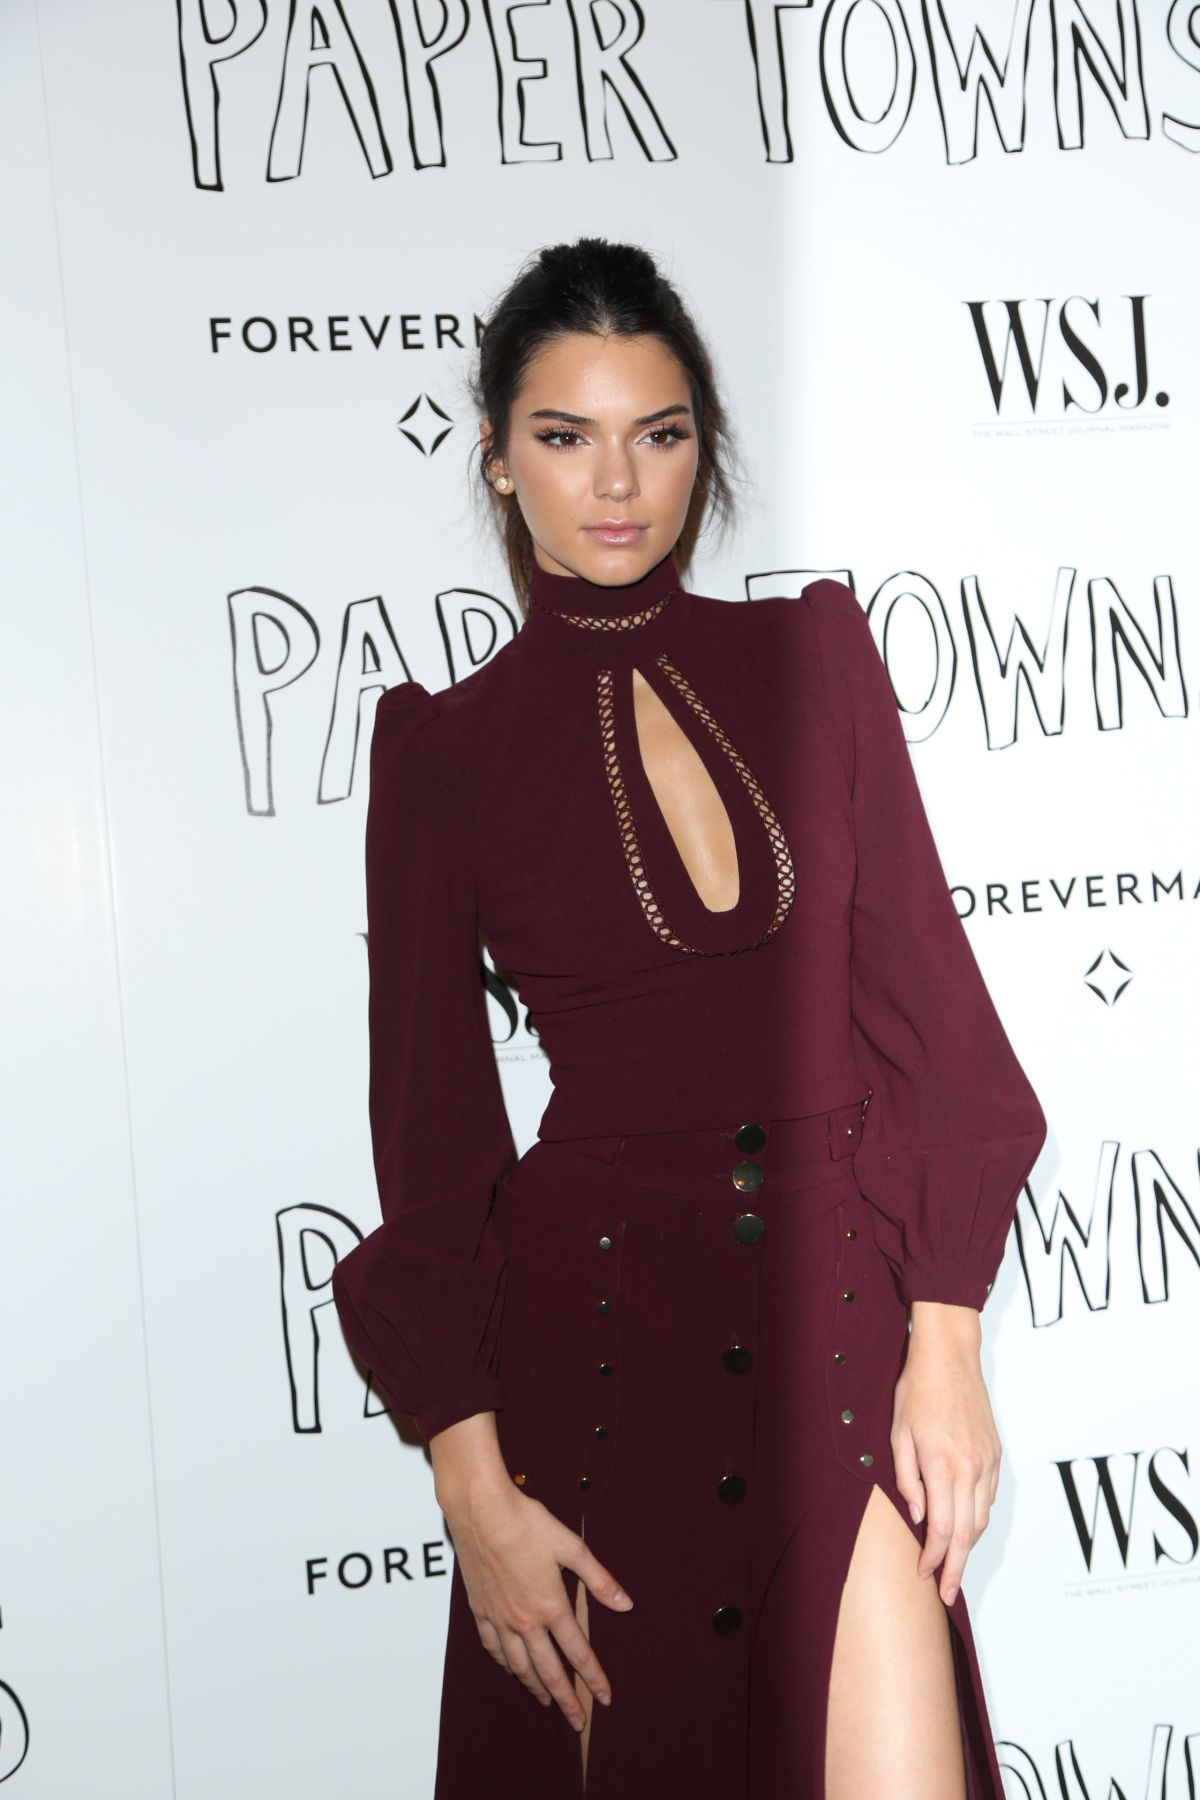 KENDALL JENNER at Paper Towns Screening in West Hollywood